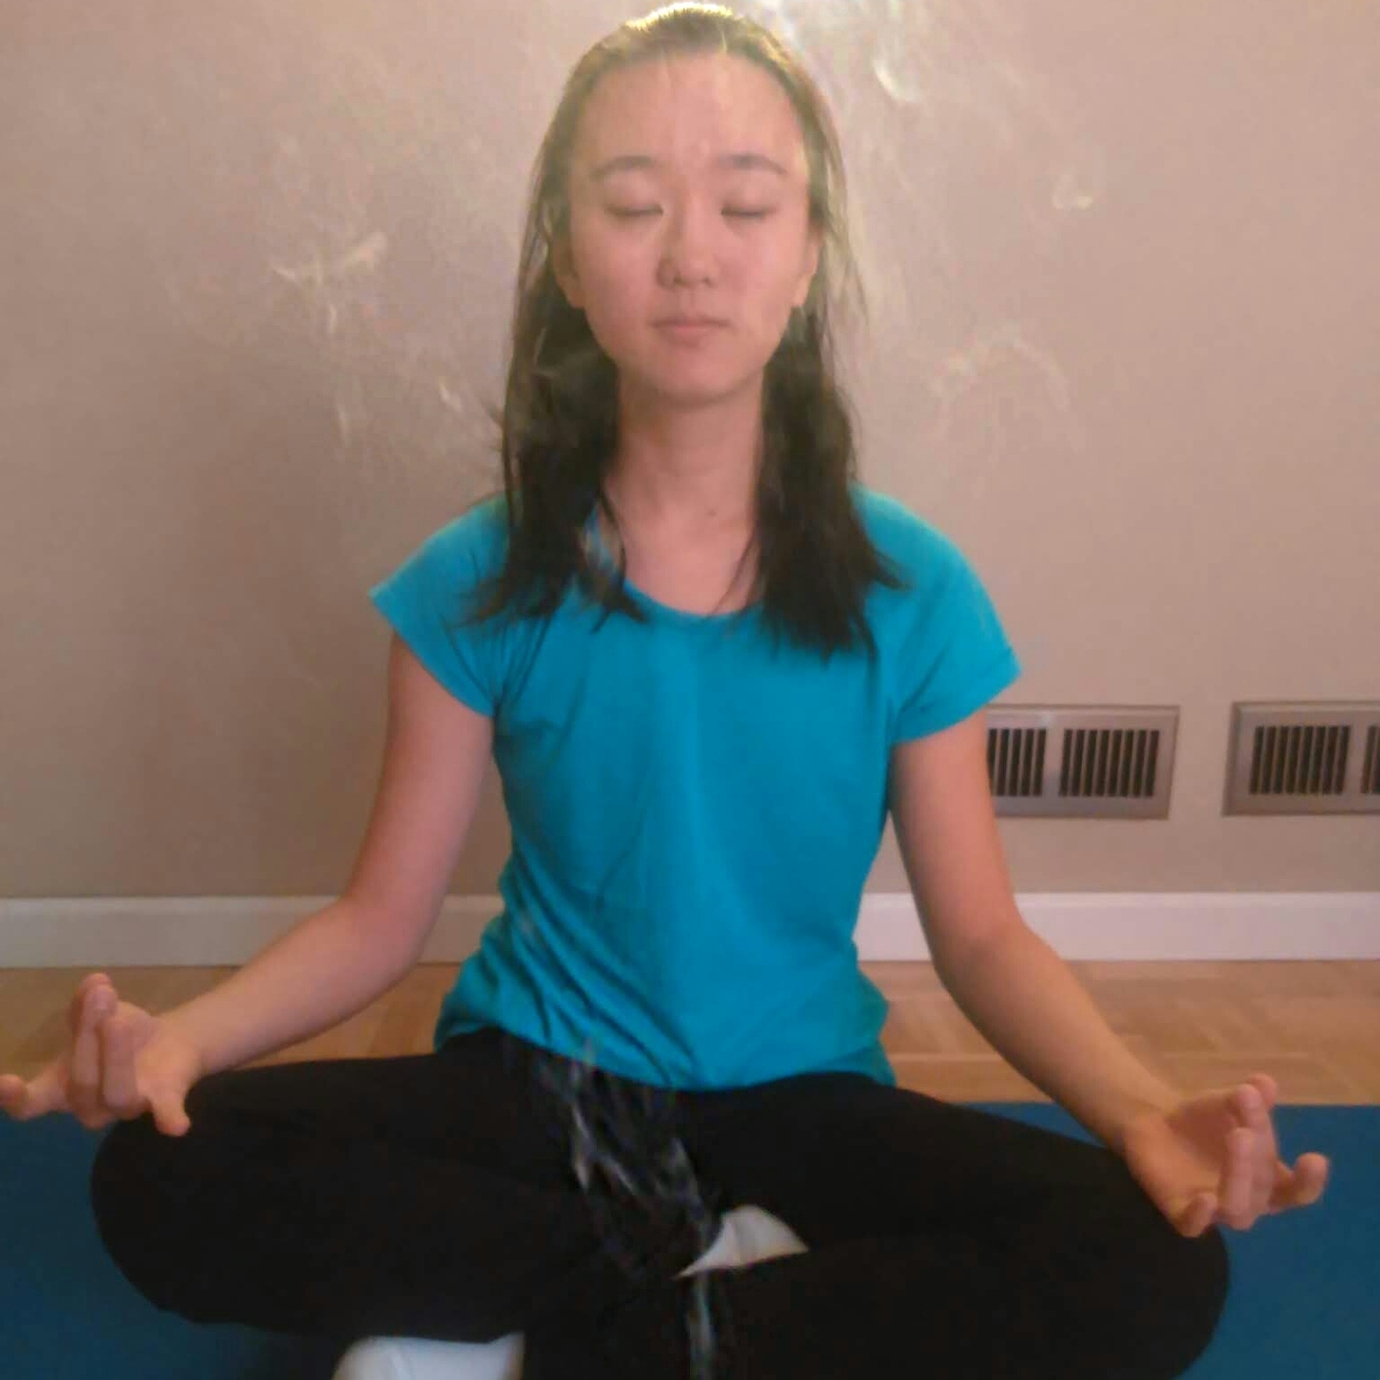 Claire meditating